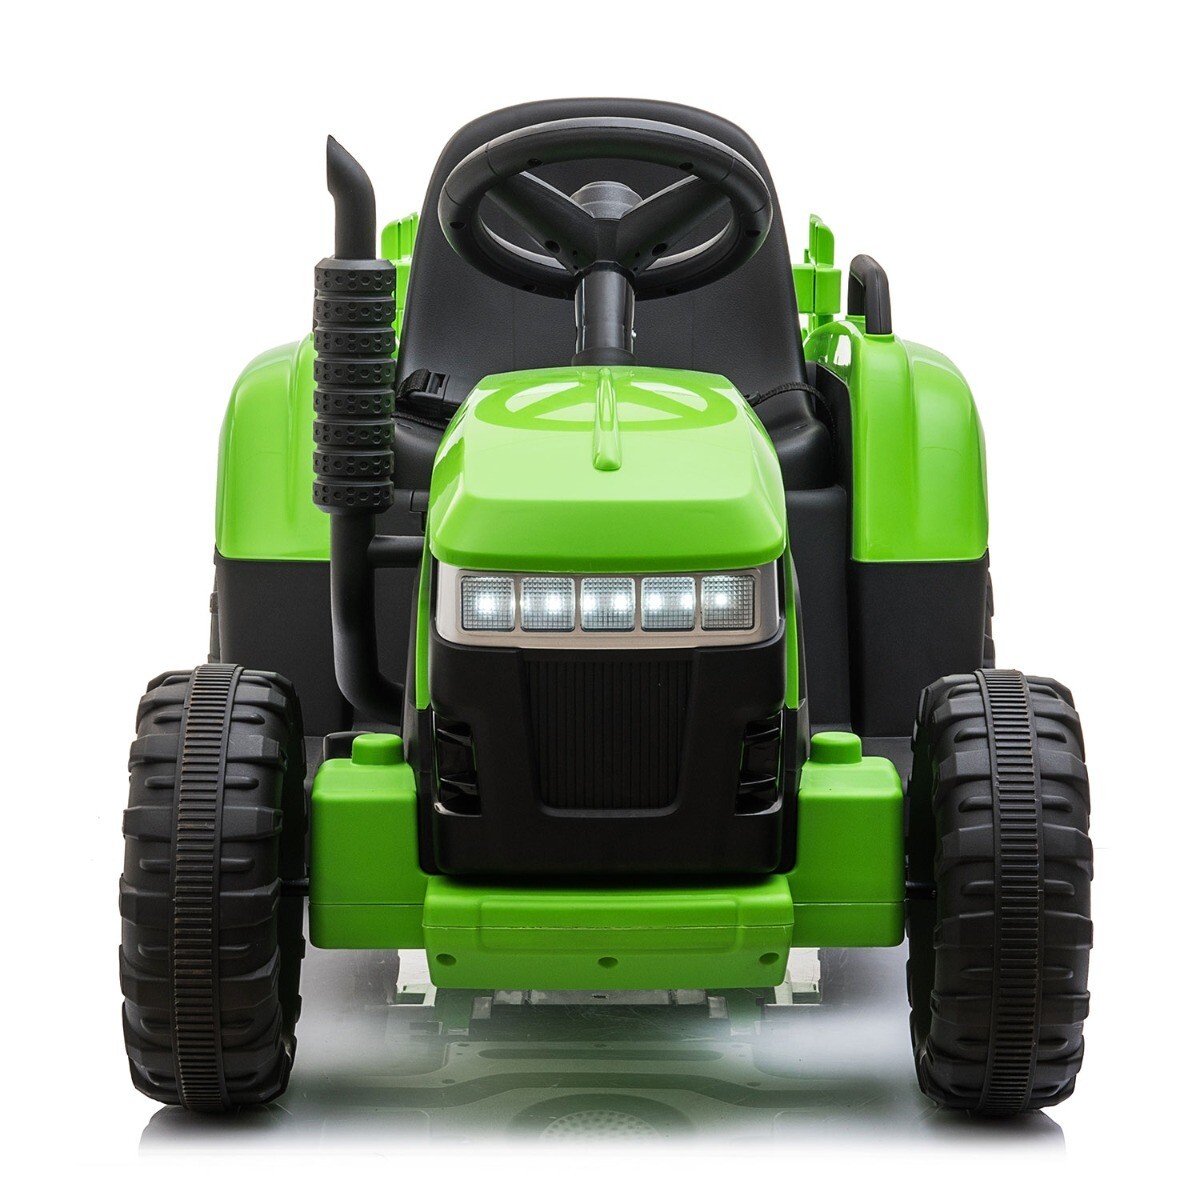 12V Kids Ride On Tractor with Trailer, Battery Powered Electric Car w/ Music, USB, Music, LED Lights, Vehicle Toy for 3 to 6 Ages, Light Green, Options: Light Green+Polypropylene